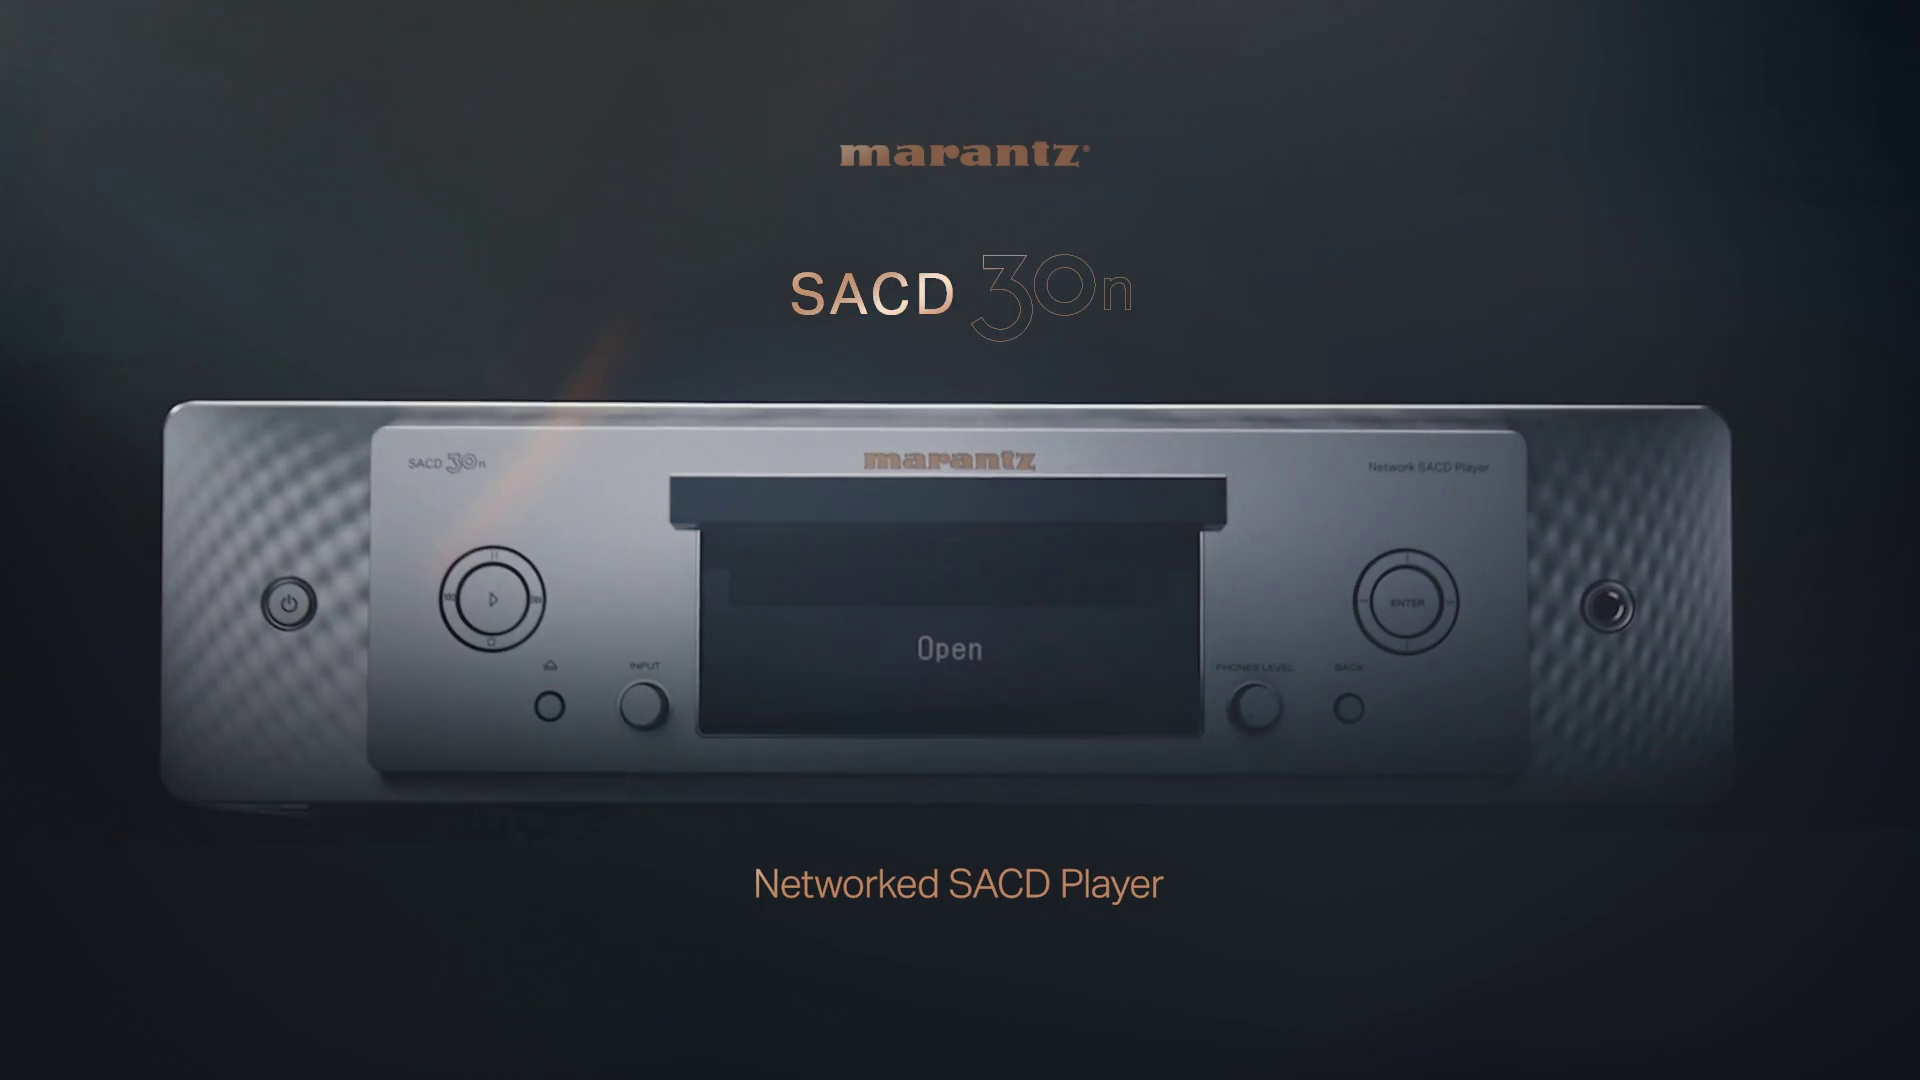 SACD 30n Product Overview v4